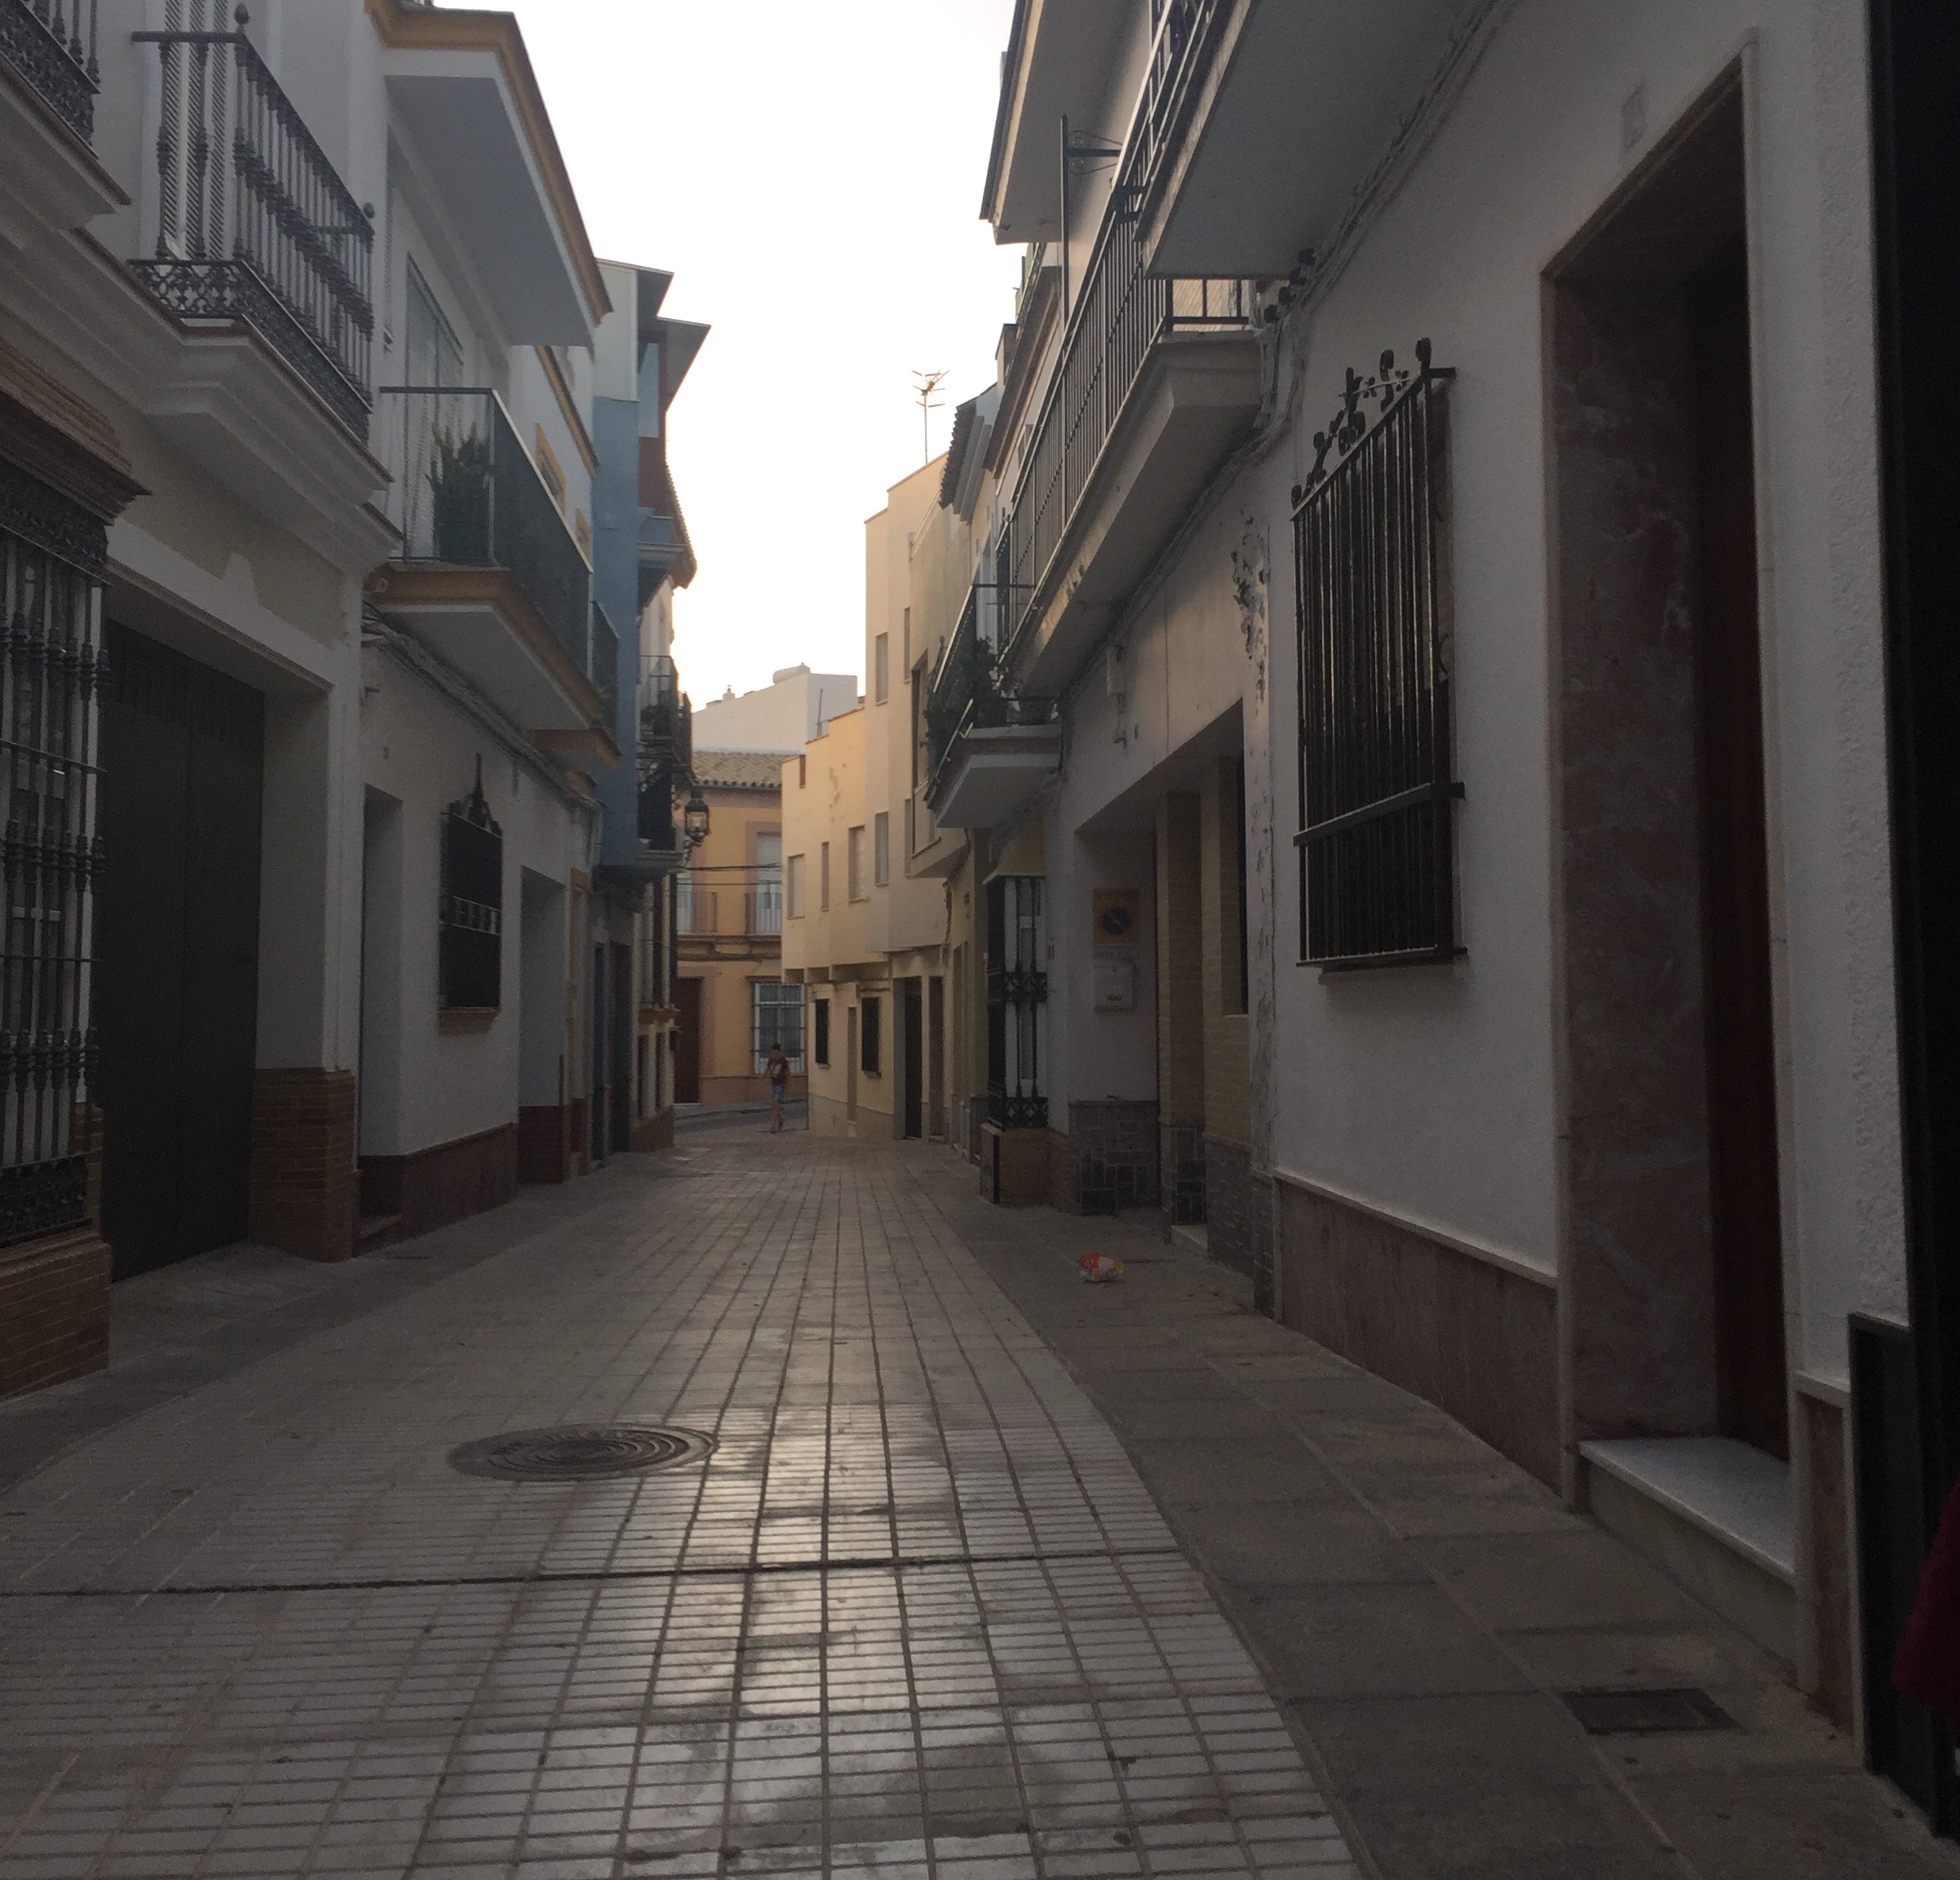 A picture of a street with buildings on either side leading off to the distance.